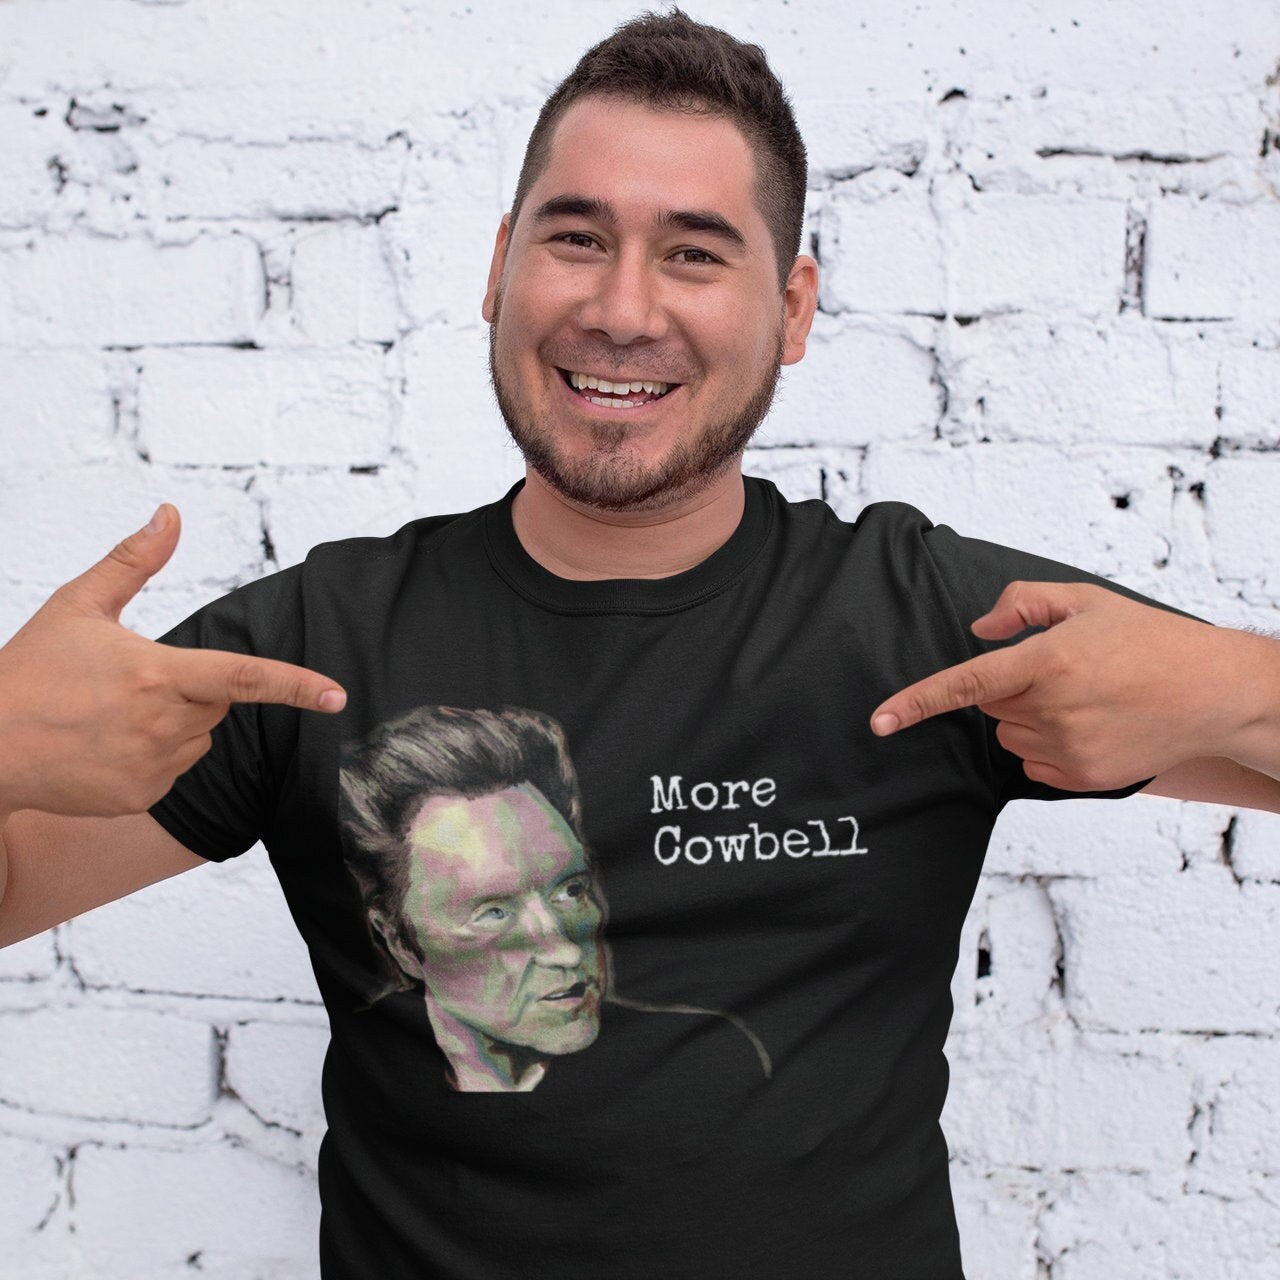 Christopher Walken More Cowbell T-shirt, Funny SNL T-shirt, Birthday gift for SNL fan, Saturday Night Live, Christopher Walken t-shirt